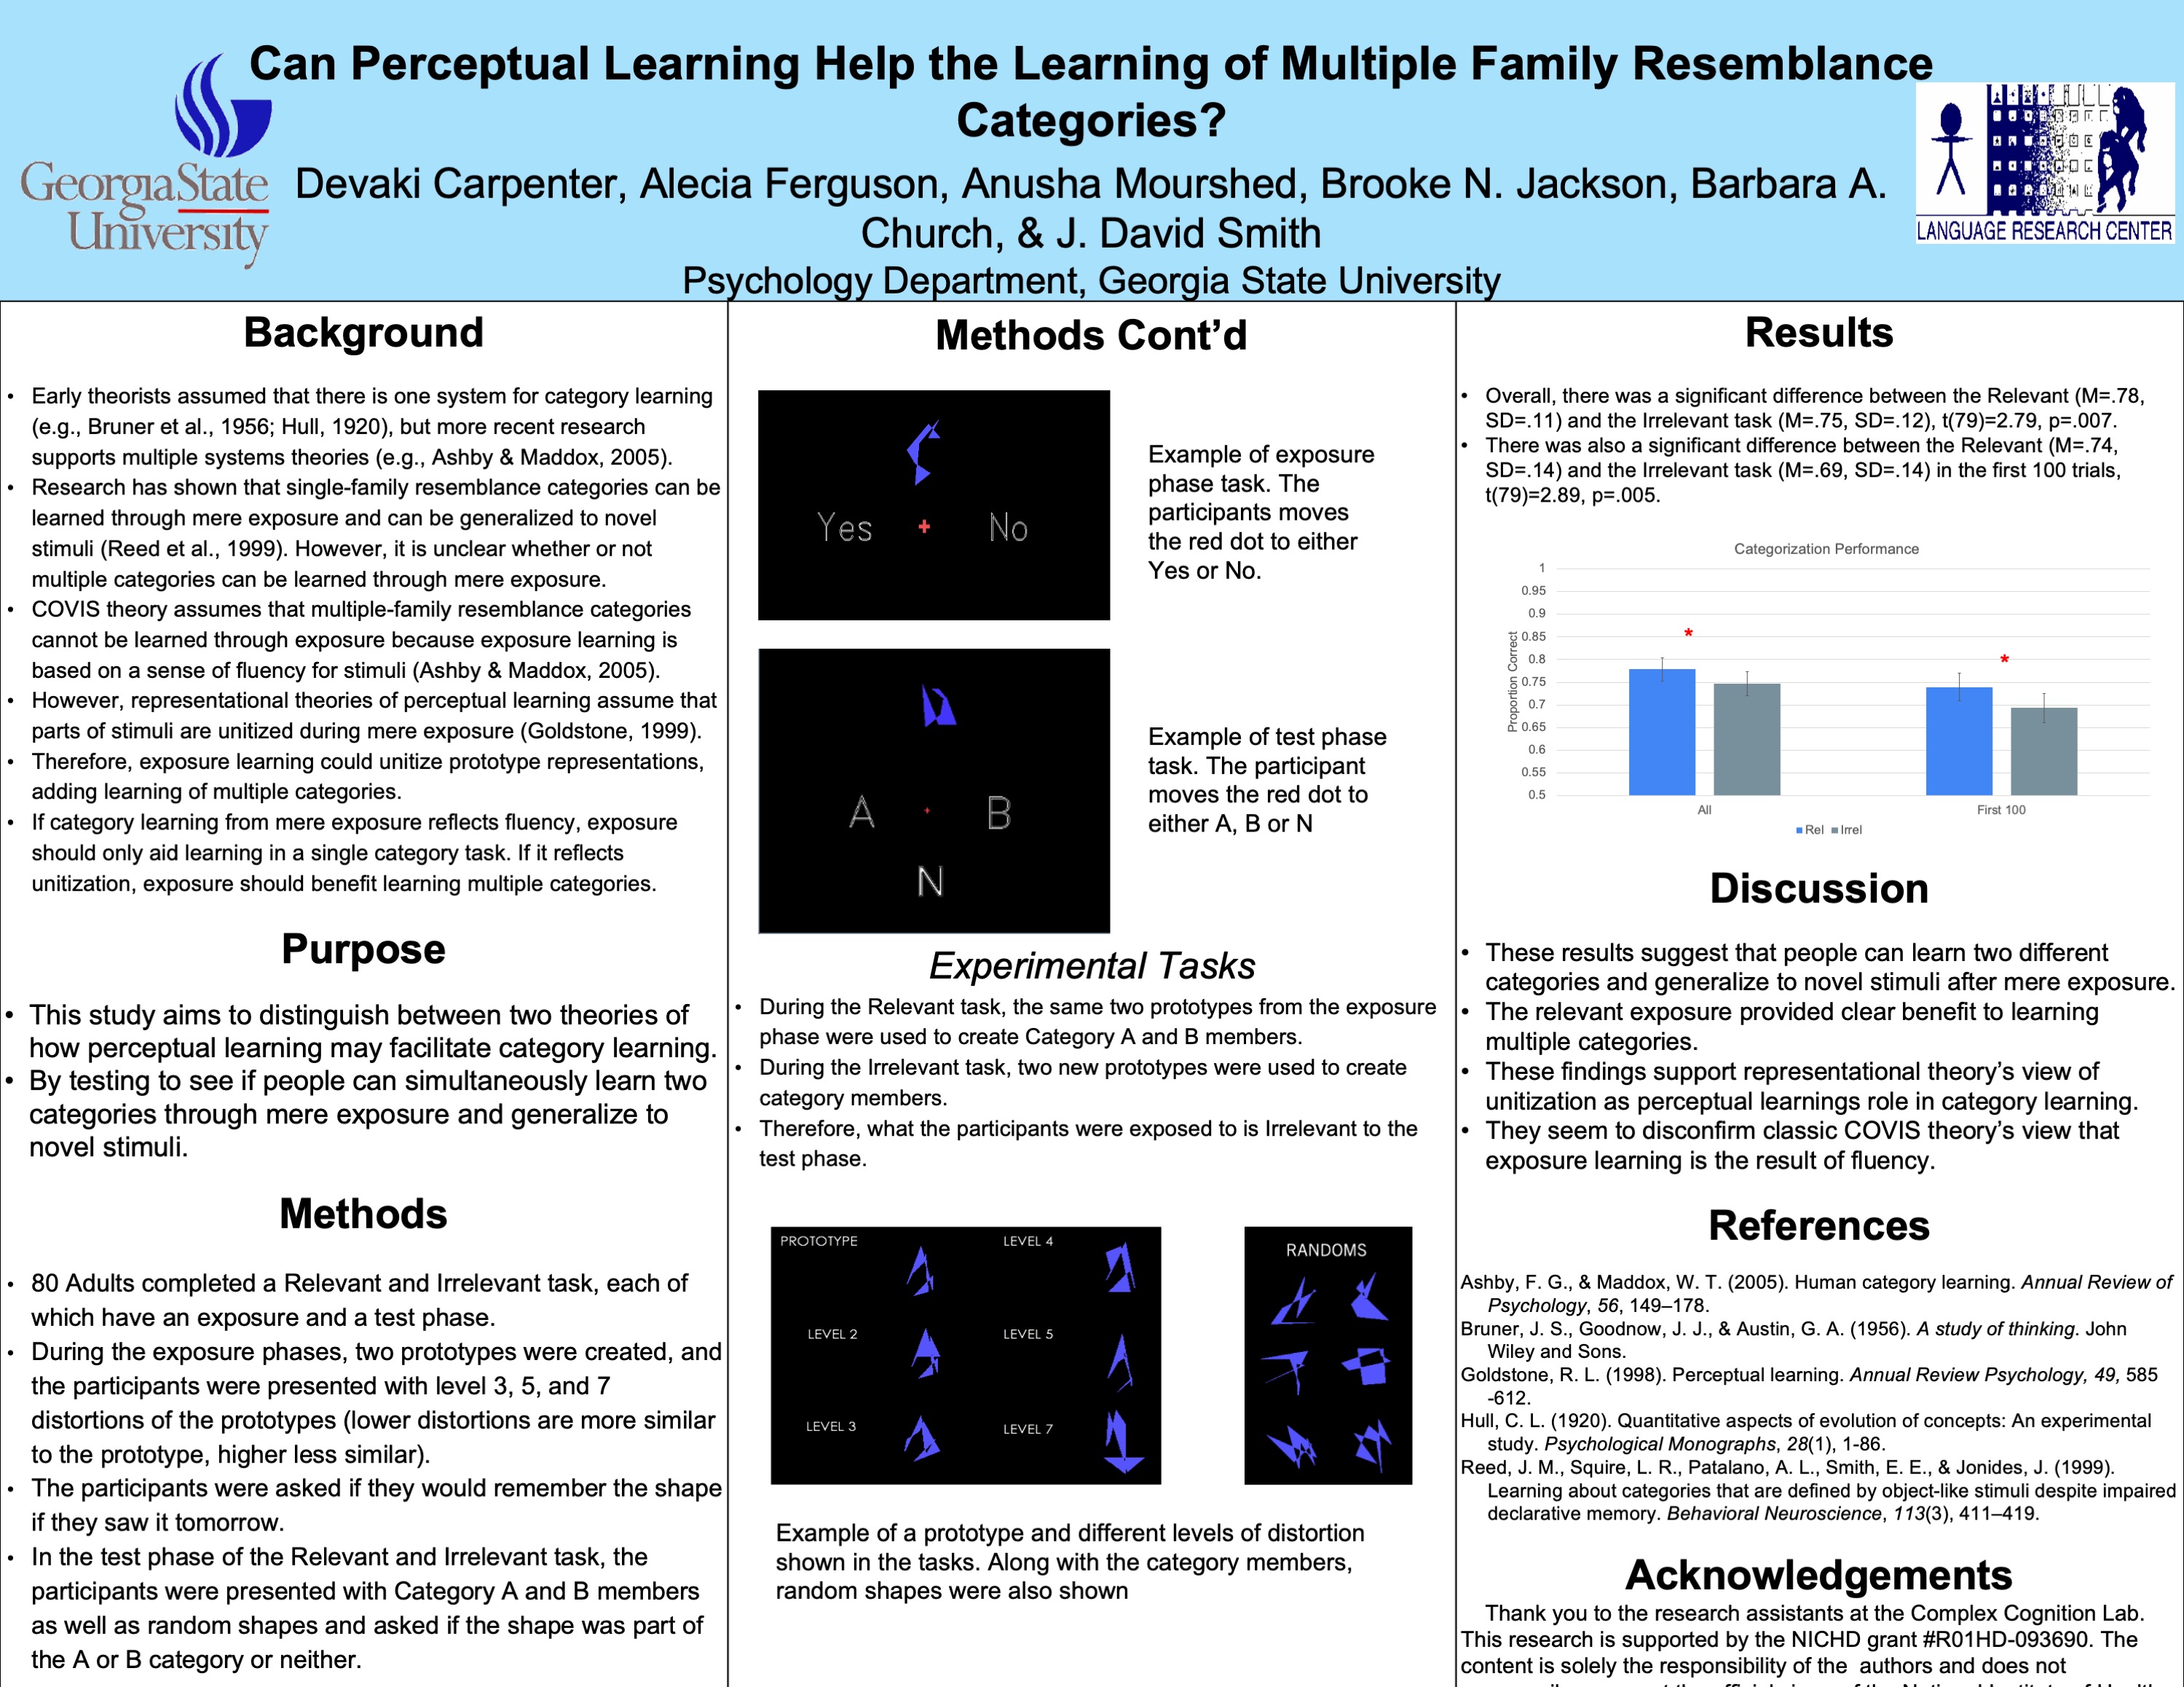 Showcase Image for Can Perceptual Learning Help the Learning of Multiple Family Resemblance Categories?